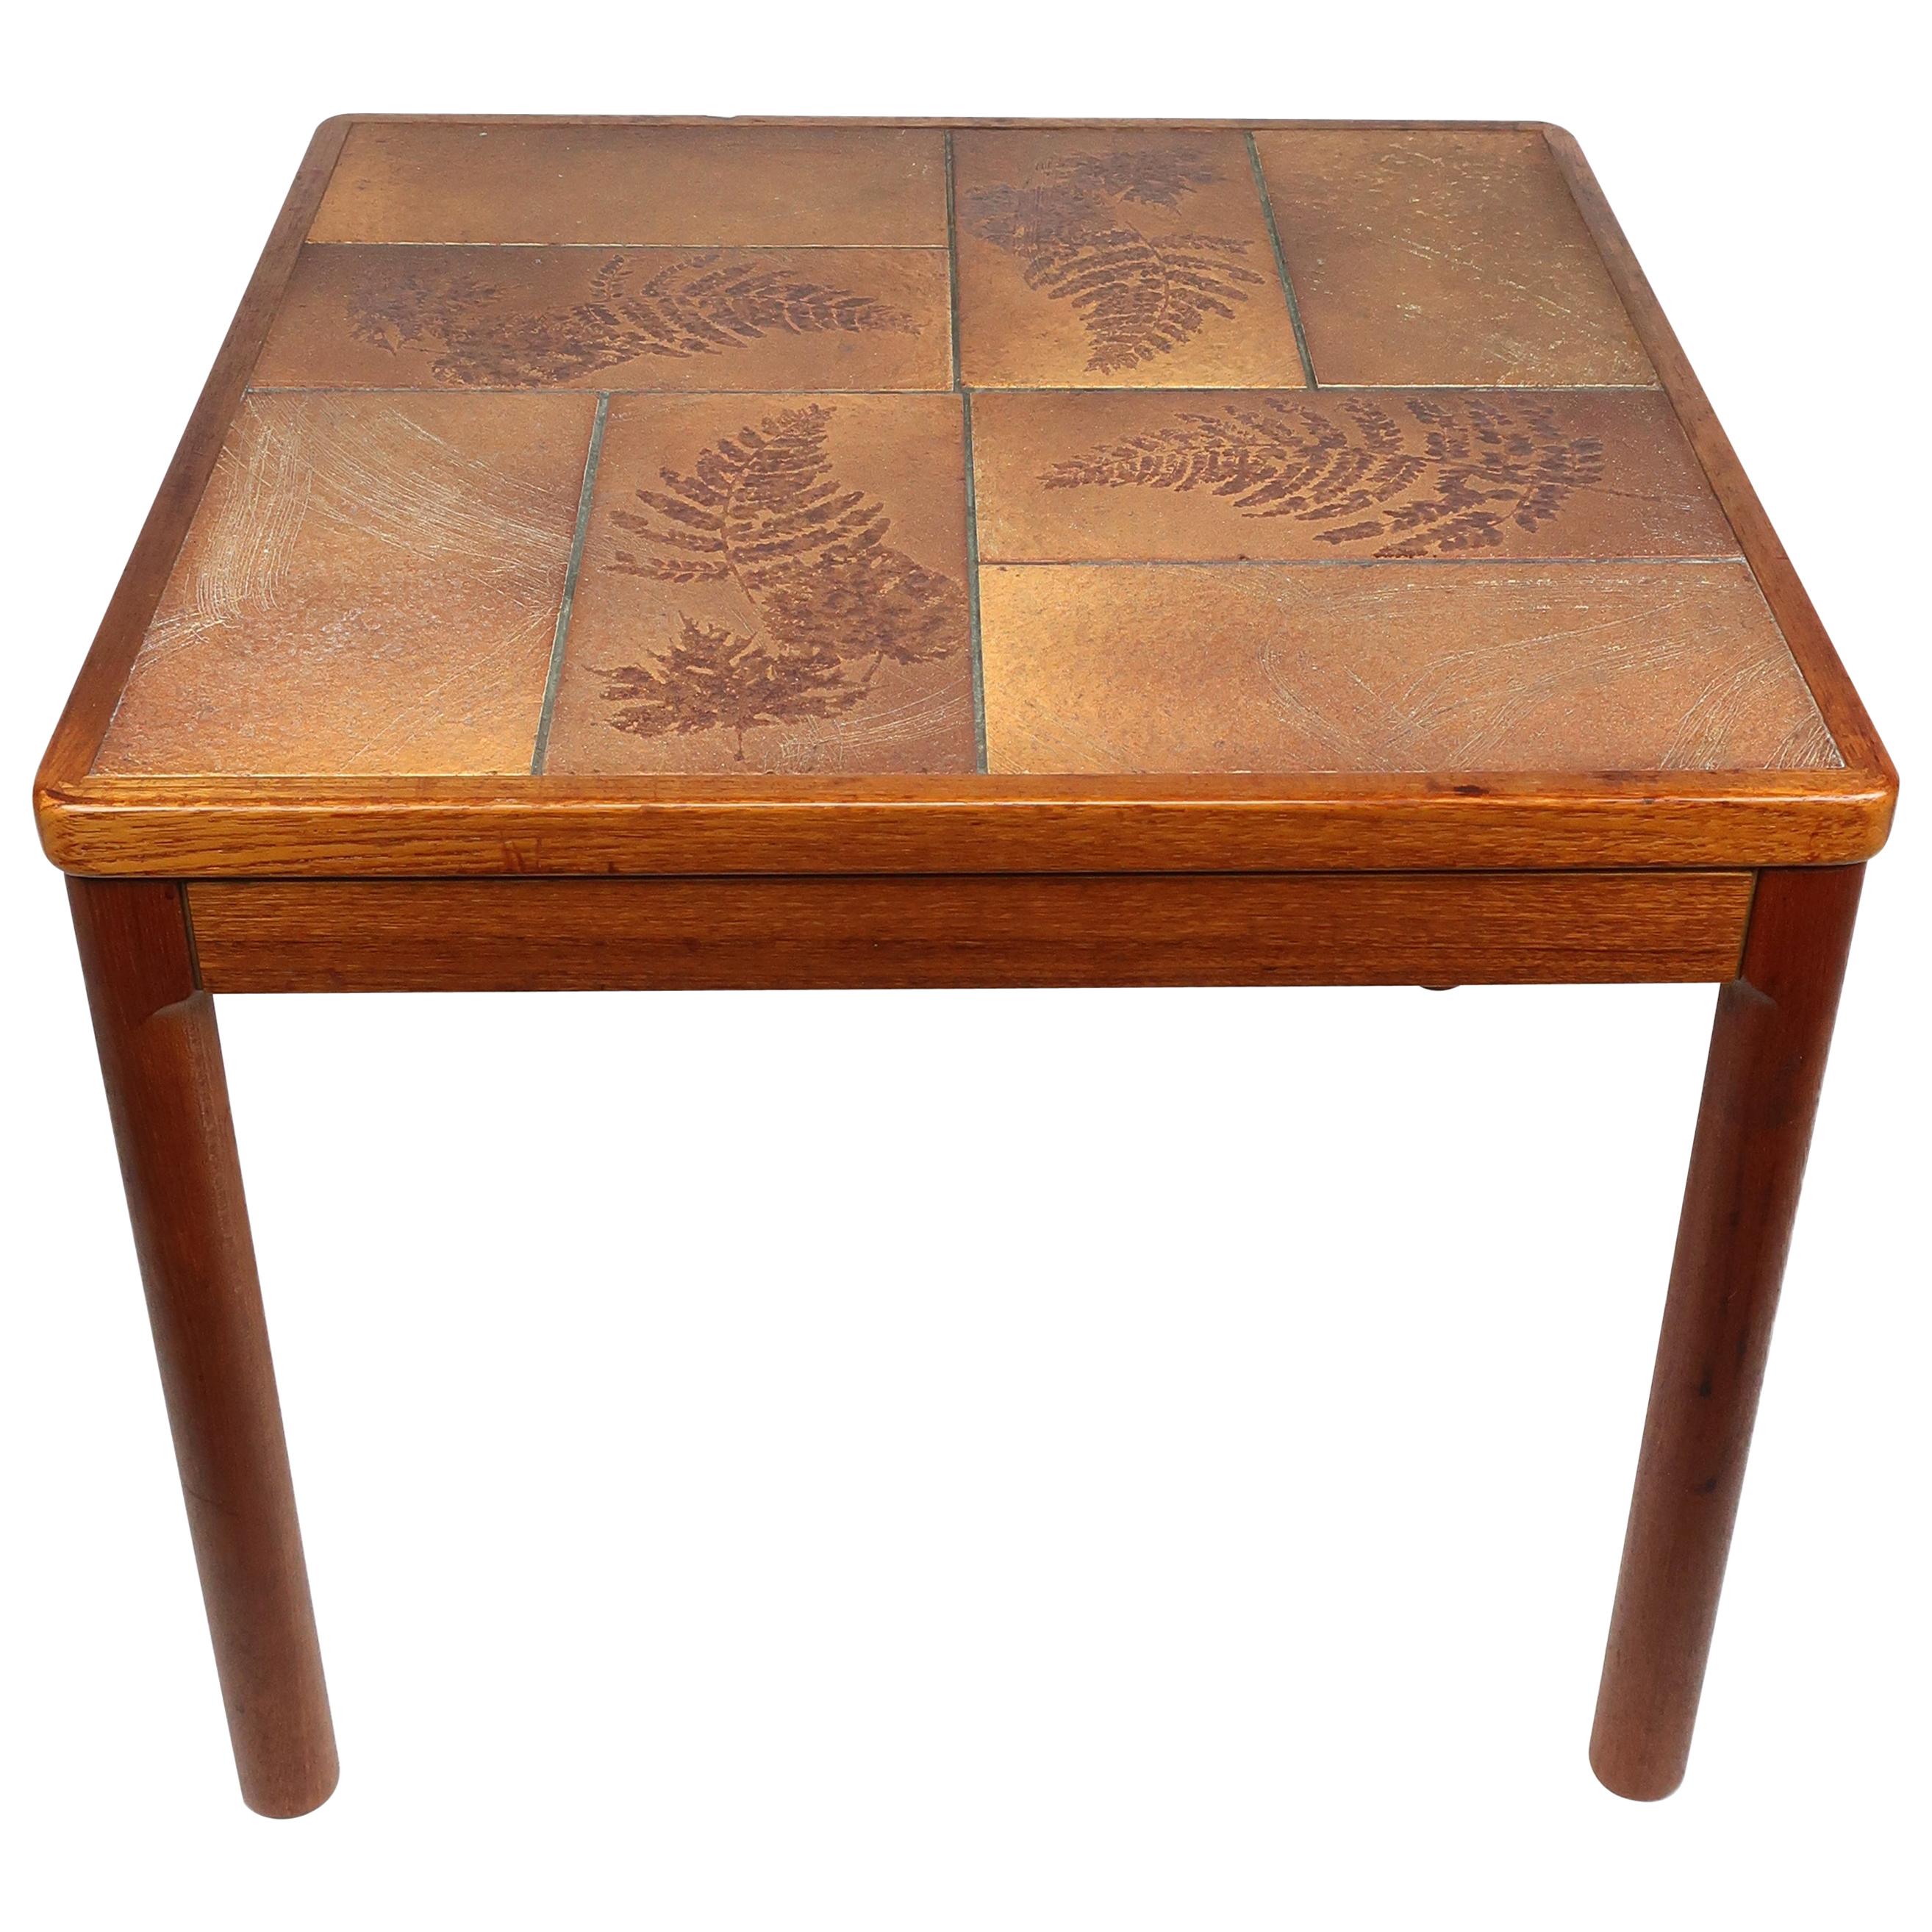 Danish Modern Teak and Tile Side Table by Trioh